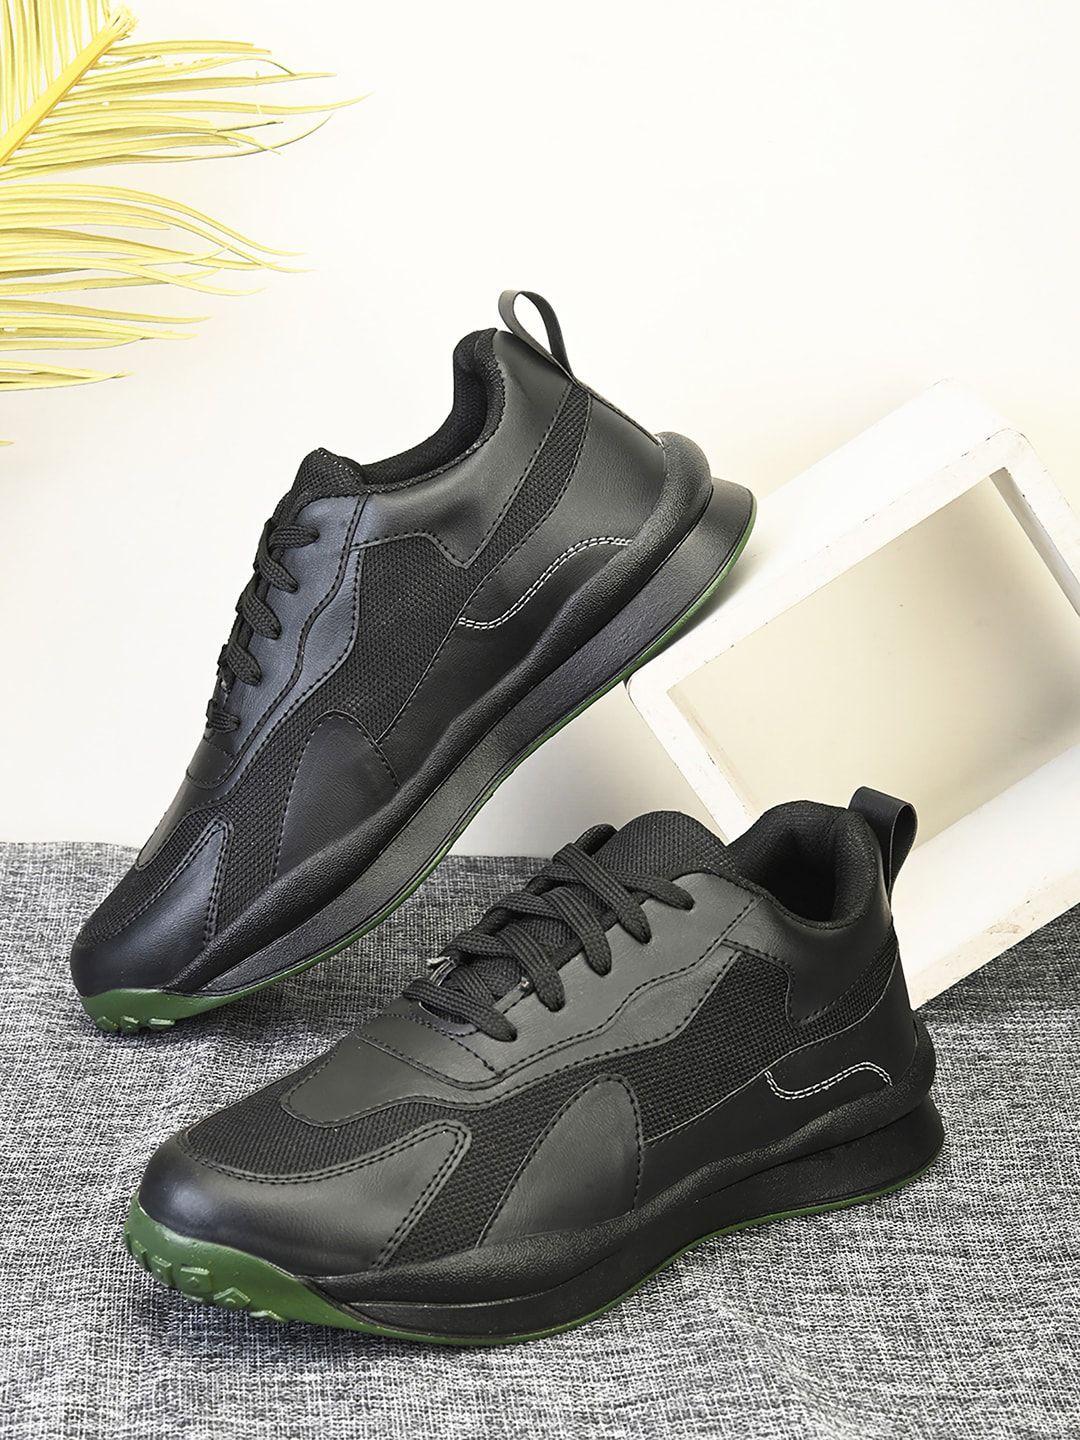 the roadster lifestyle co. men black textured lightweight sneakers